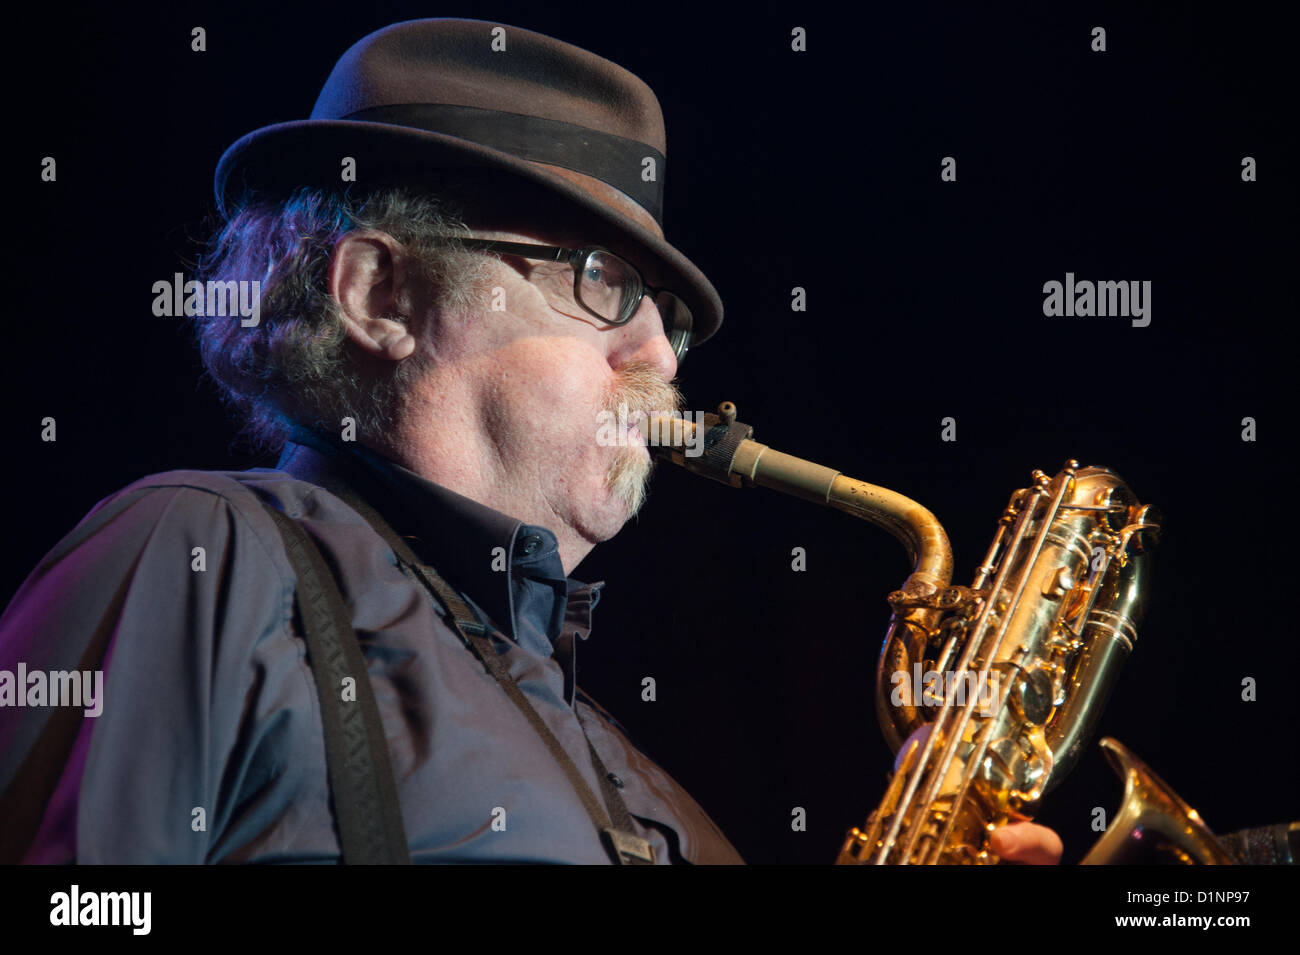 LINCOLN, CA - December 31: Stephen Kupka with Tower of Power brings in the New Year at Thunder Valley Casino Resort in Lincoln, California on December 31, 2012 Stock Photo